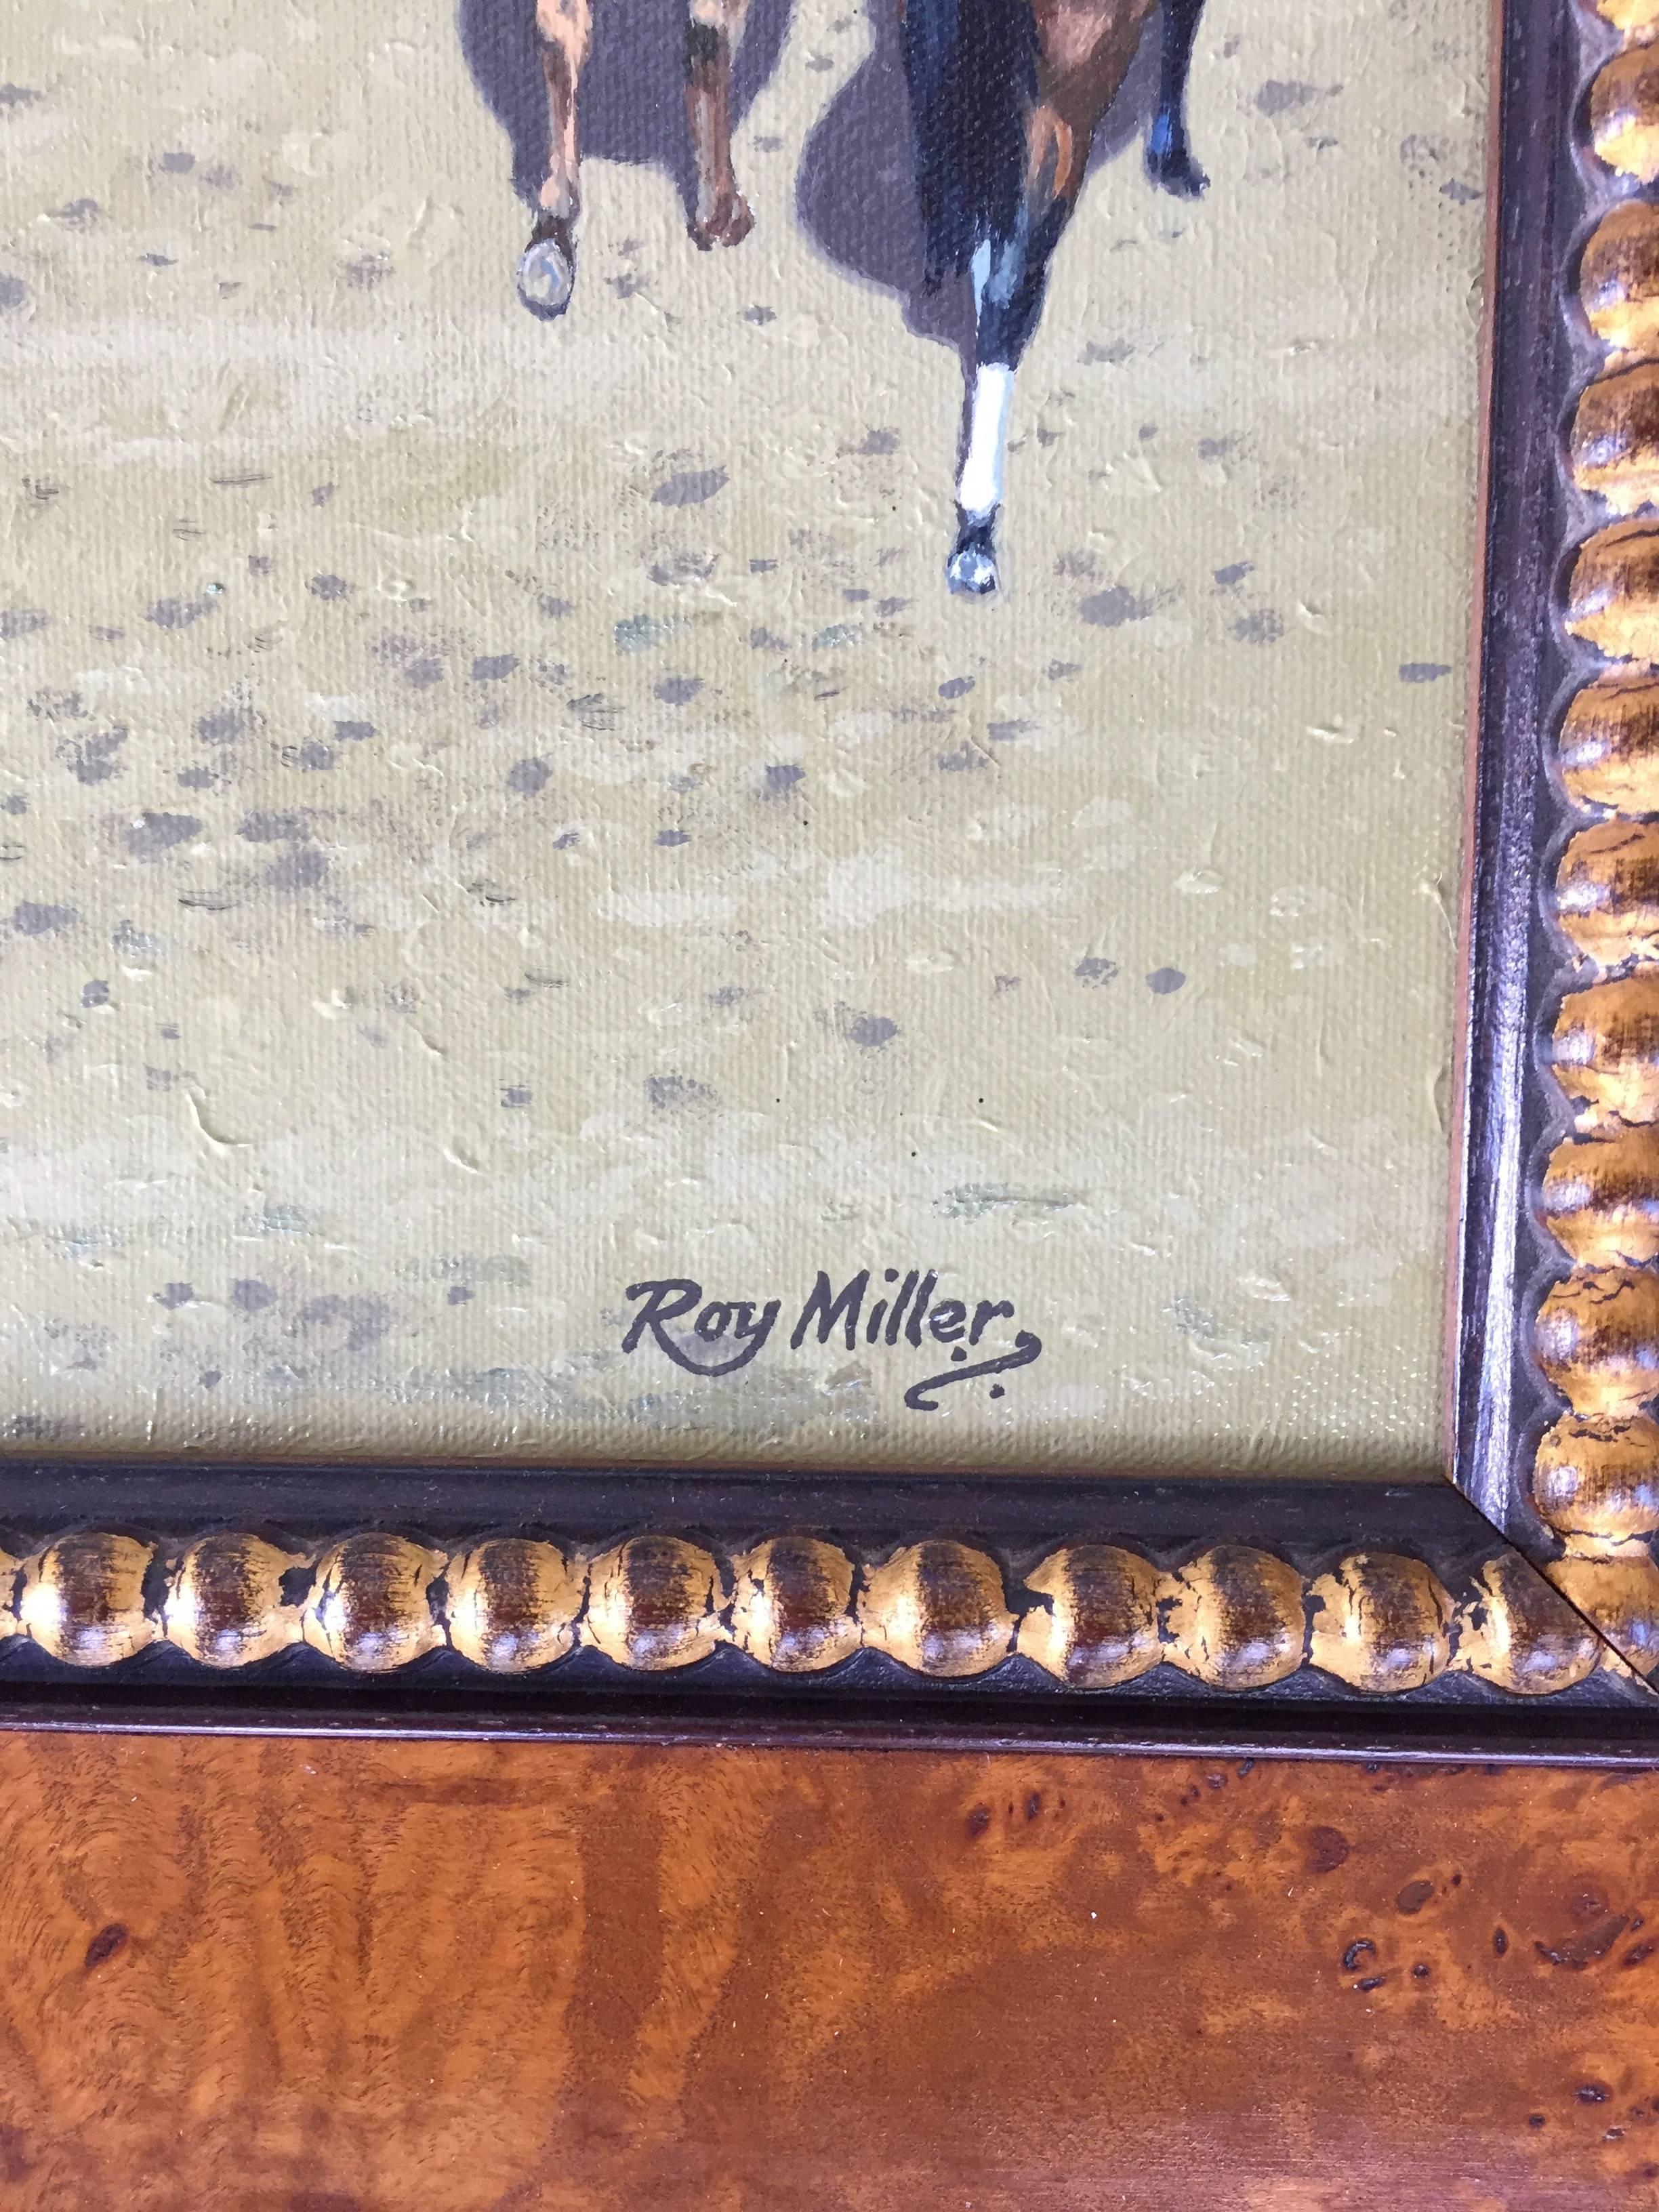 Signed lower right and inscribed verso. Ex Geary gallery Darien CT. Oil on canvas.

As a member of the Society of Equestrian Artists (SEA) and the American Academy of Equine Art, Roy is an artist of international repute.

Roy began work as a